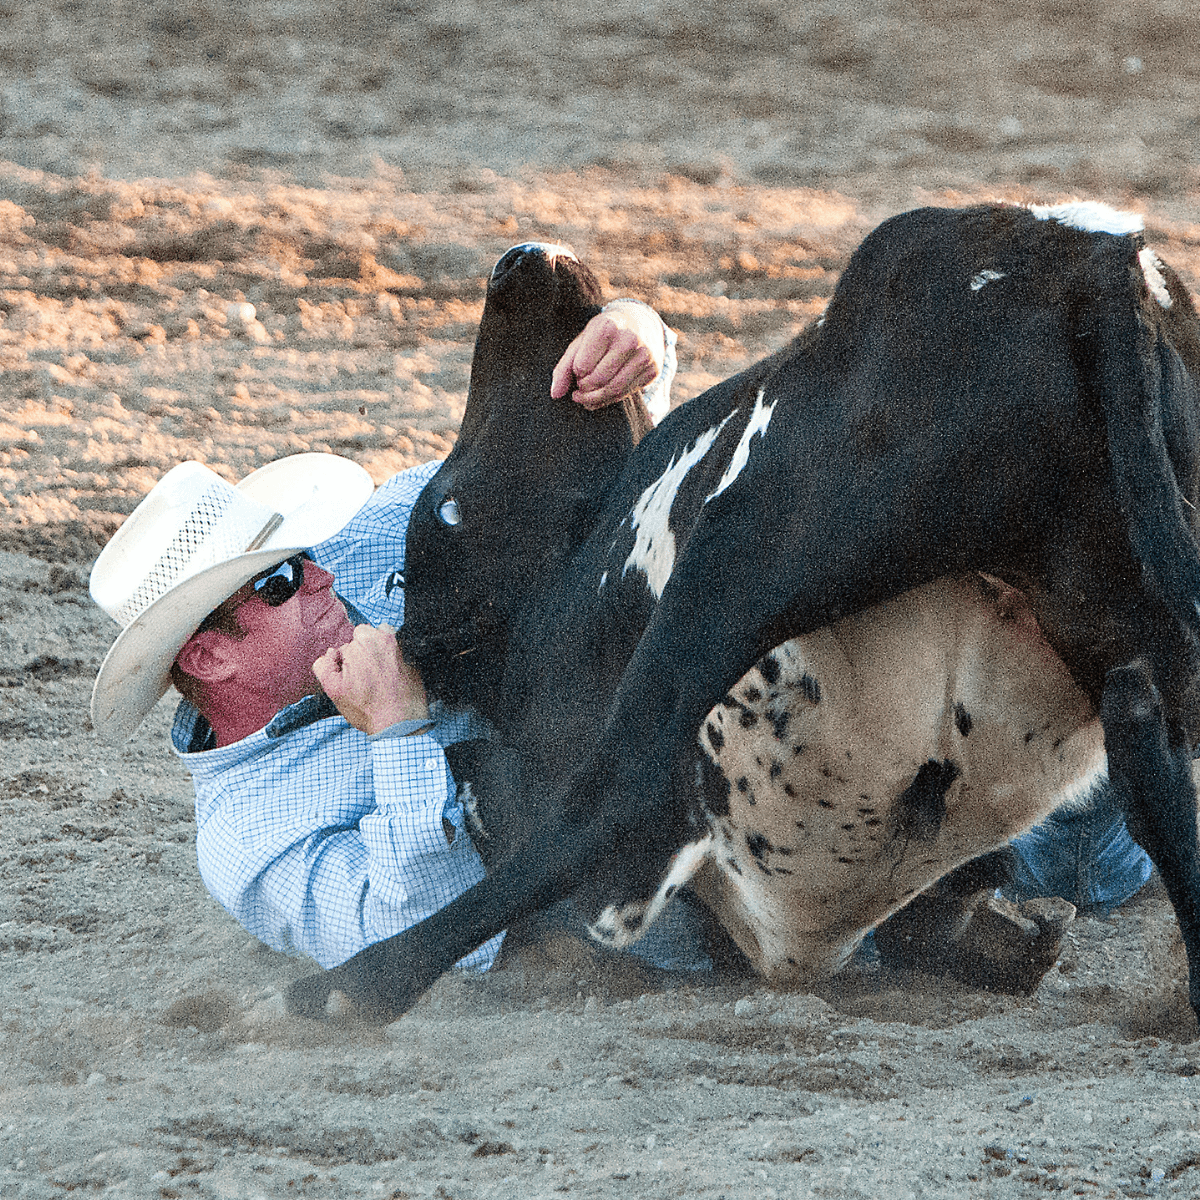 A photo of steer wrestling at a rodeo event